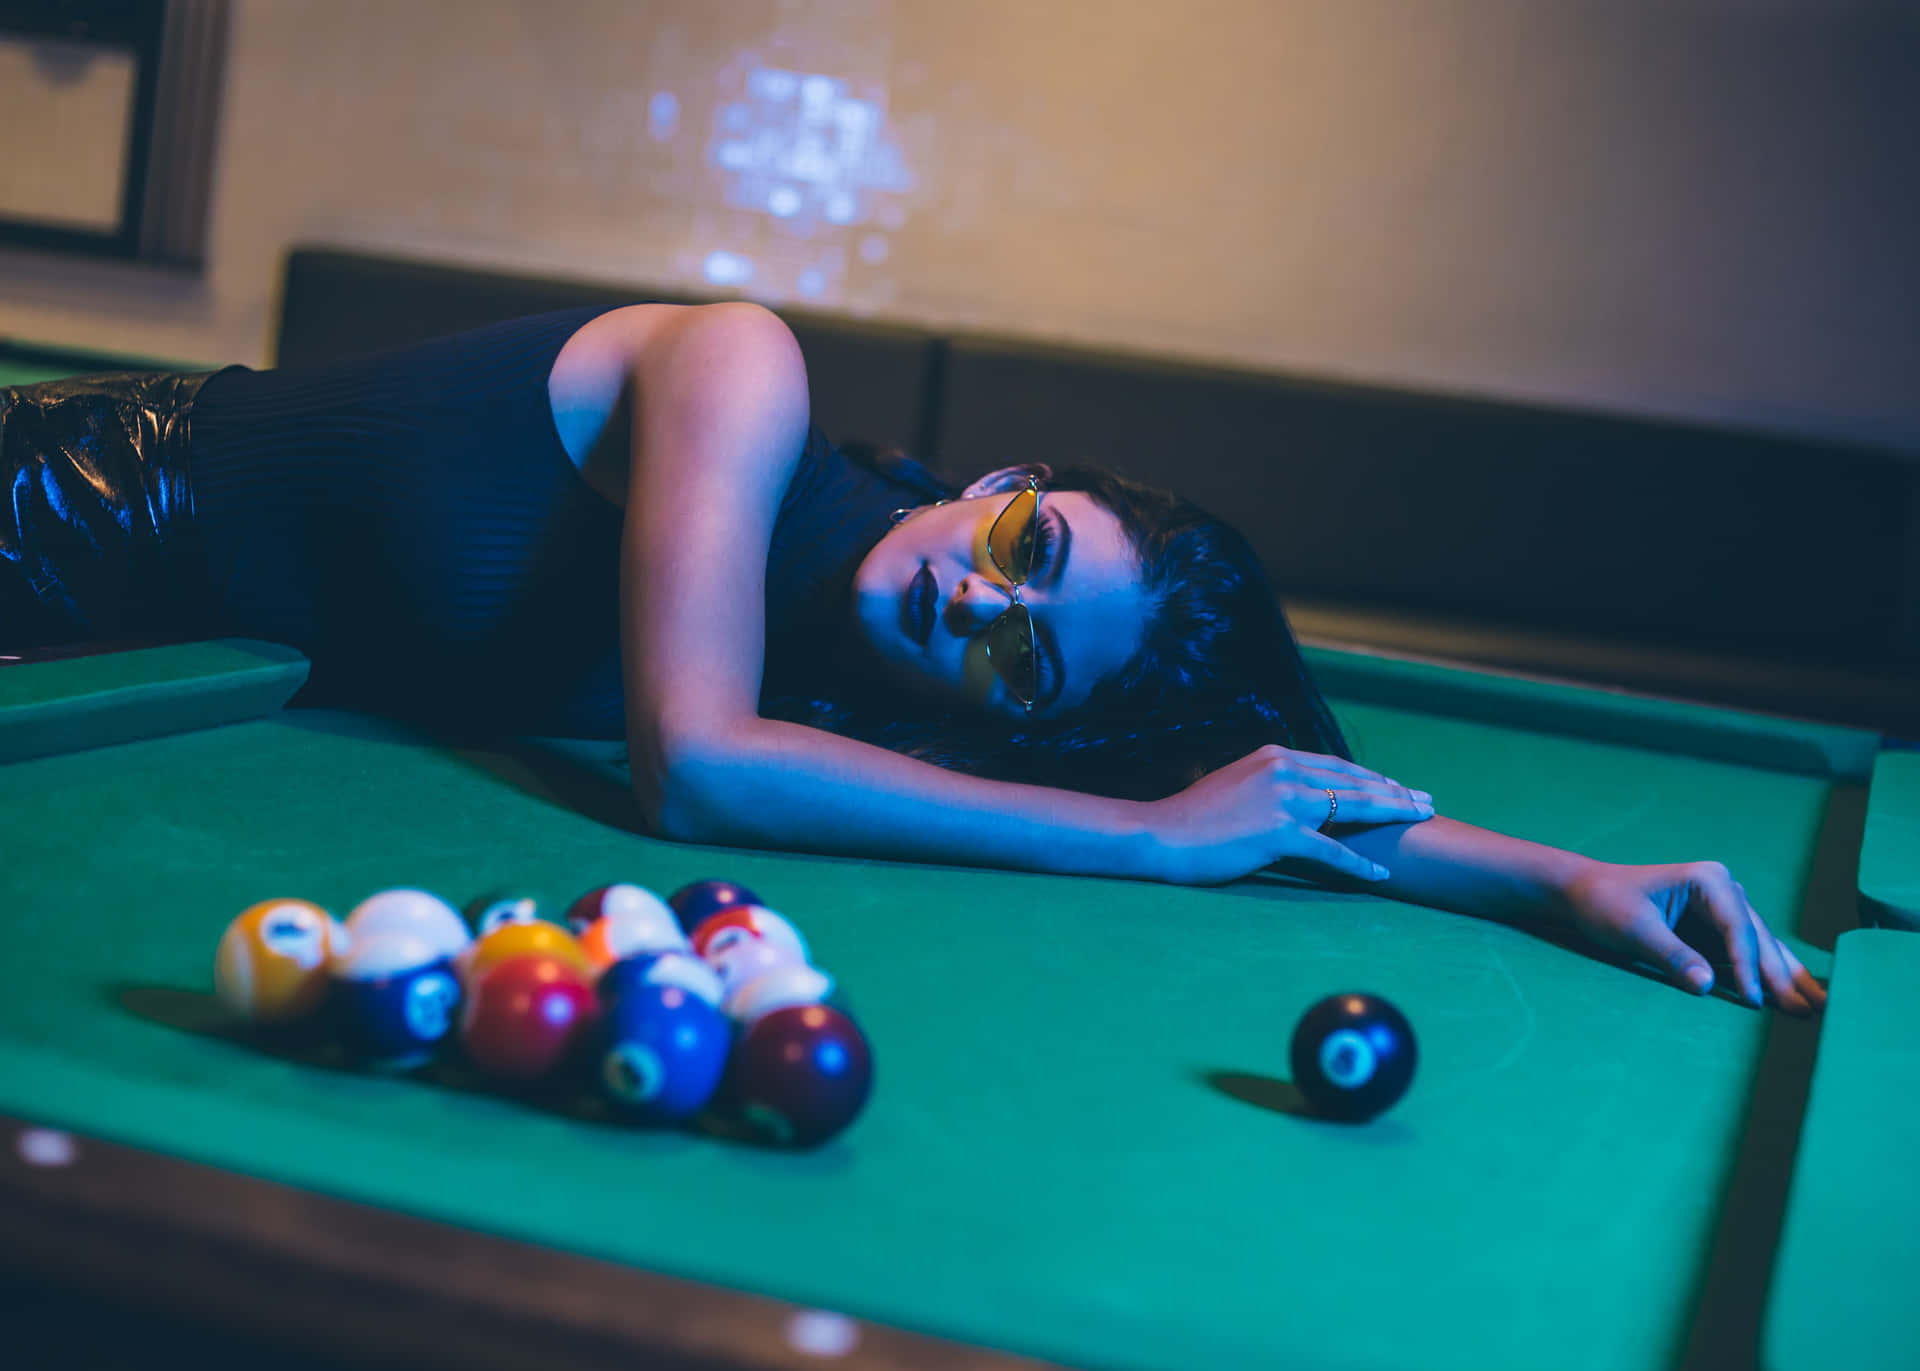 Artistic Image of a Woman Lounging on a Pool Table Wallpaper